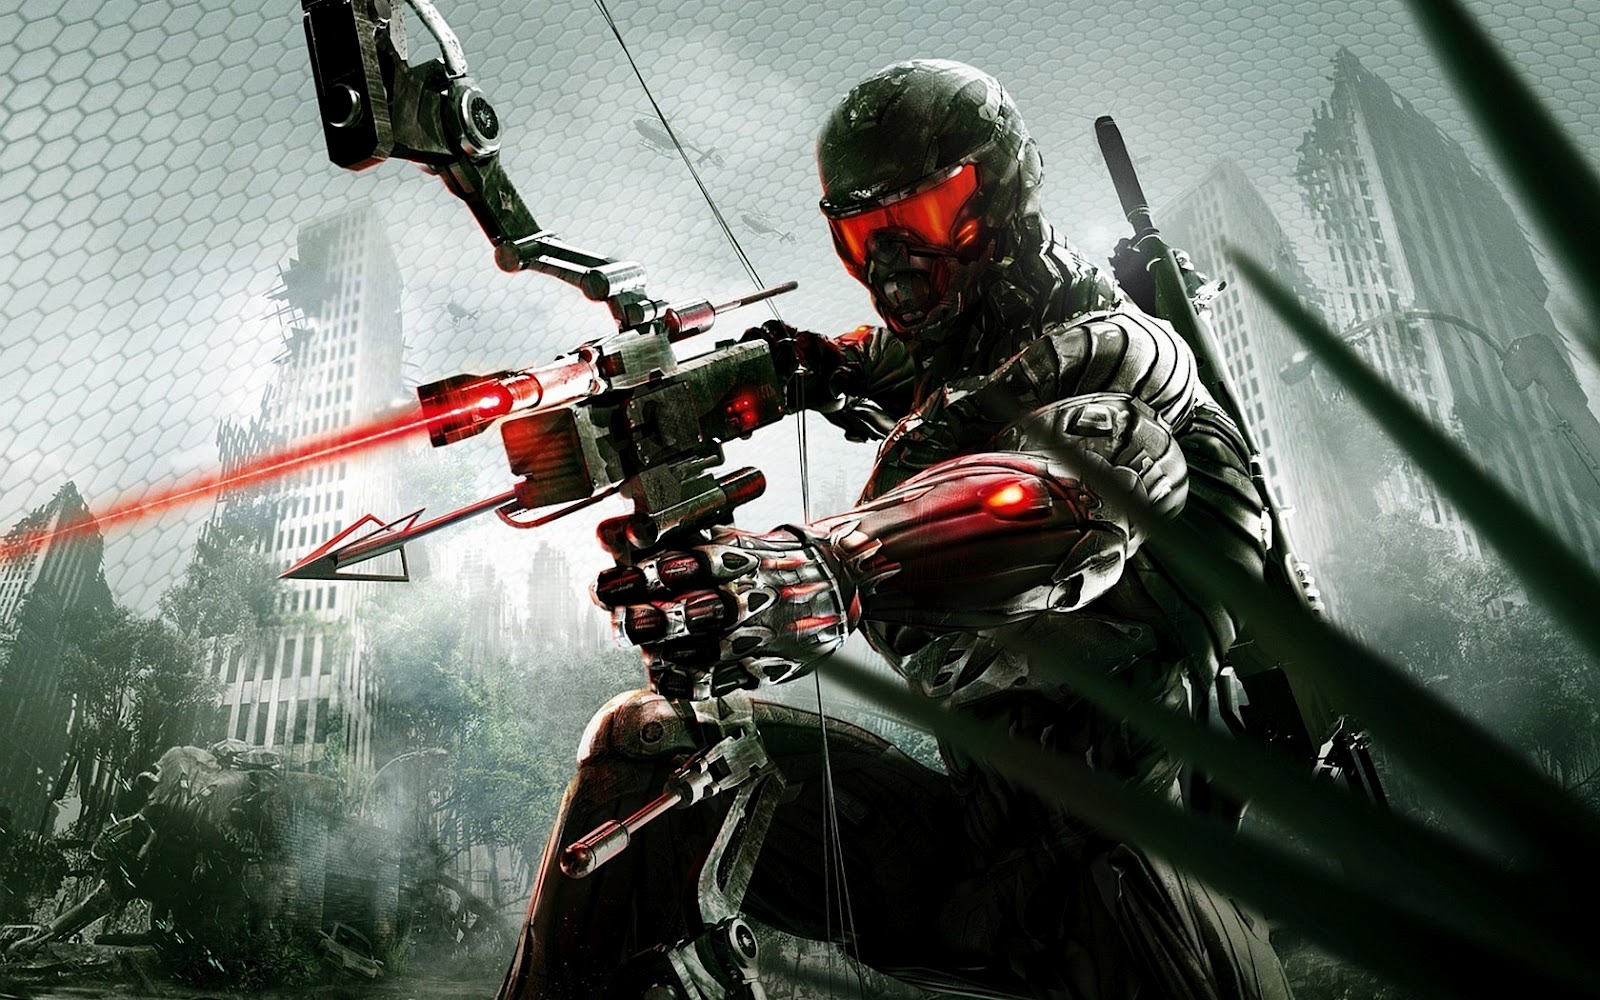 Crysis New Game HD Wallpaper And Dvd Cover